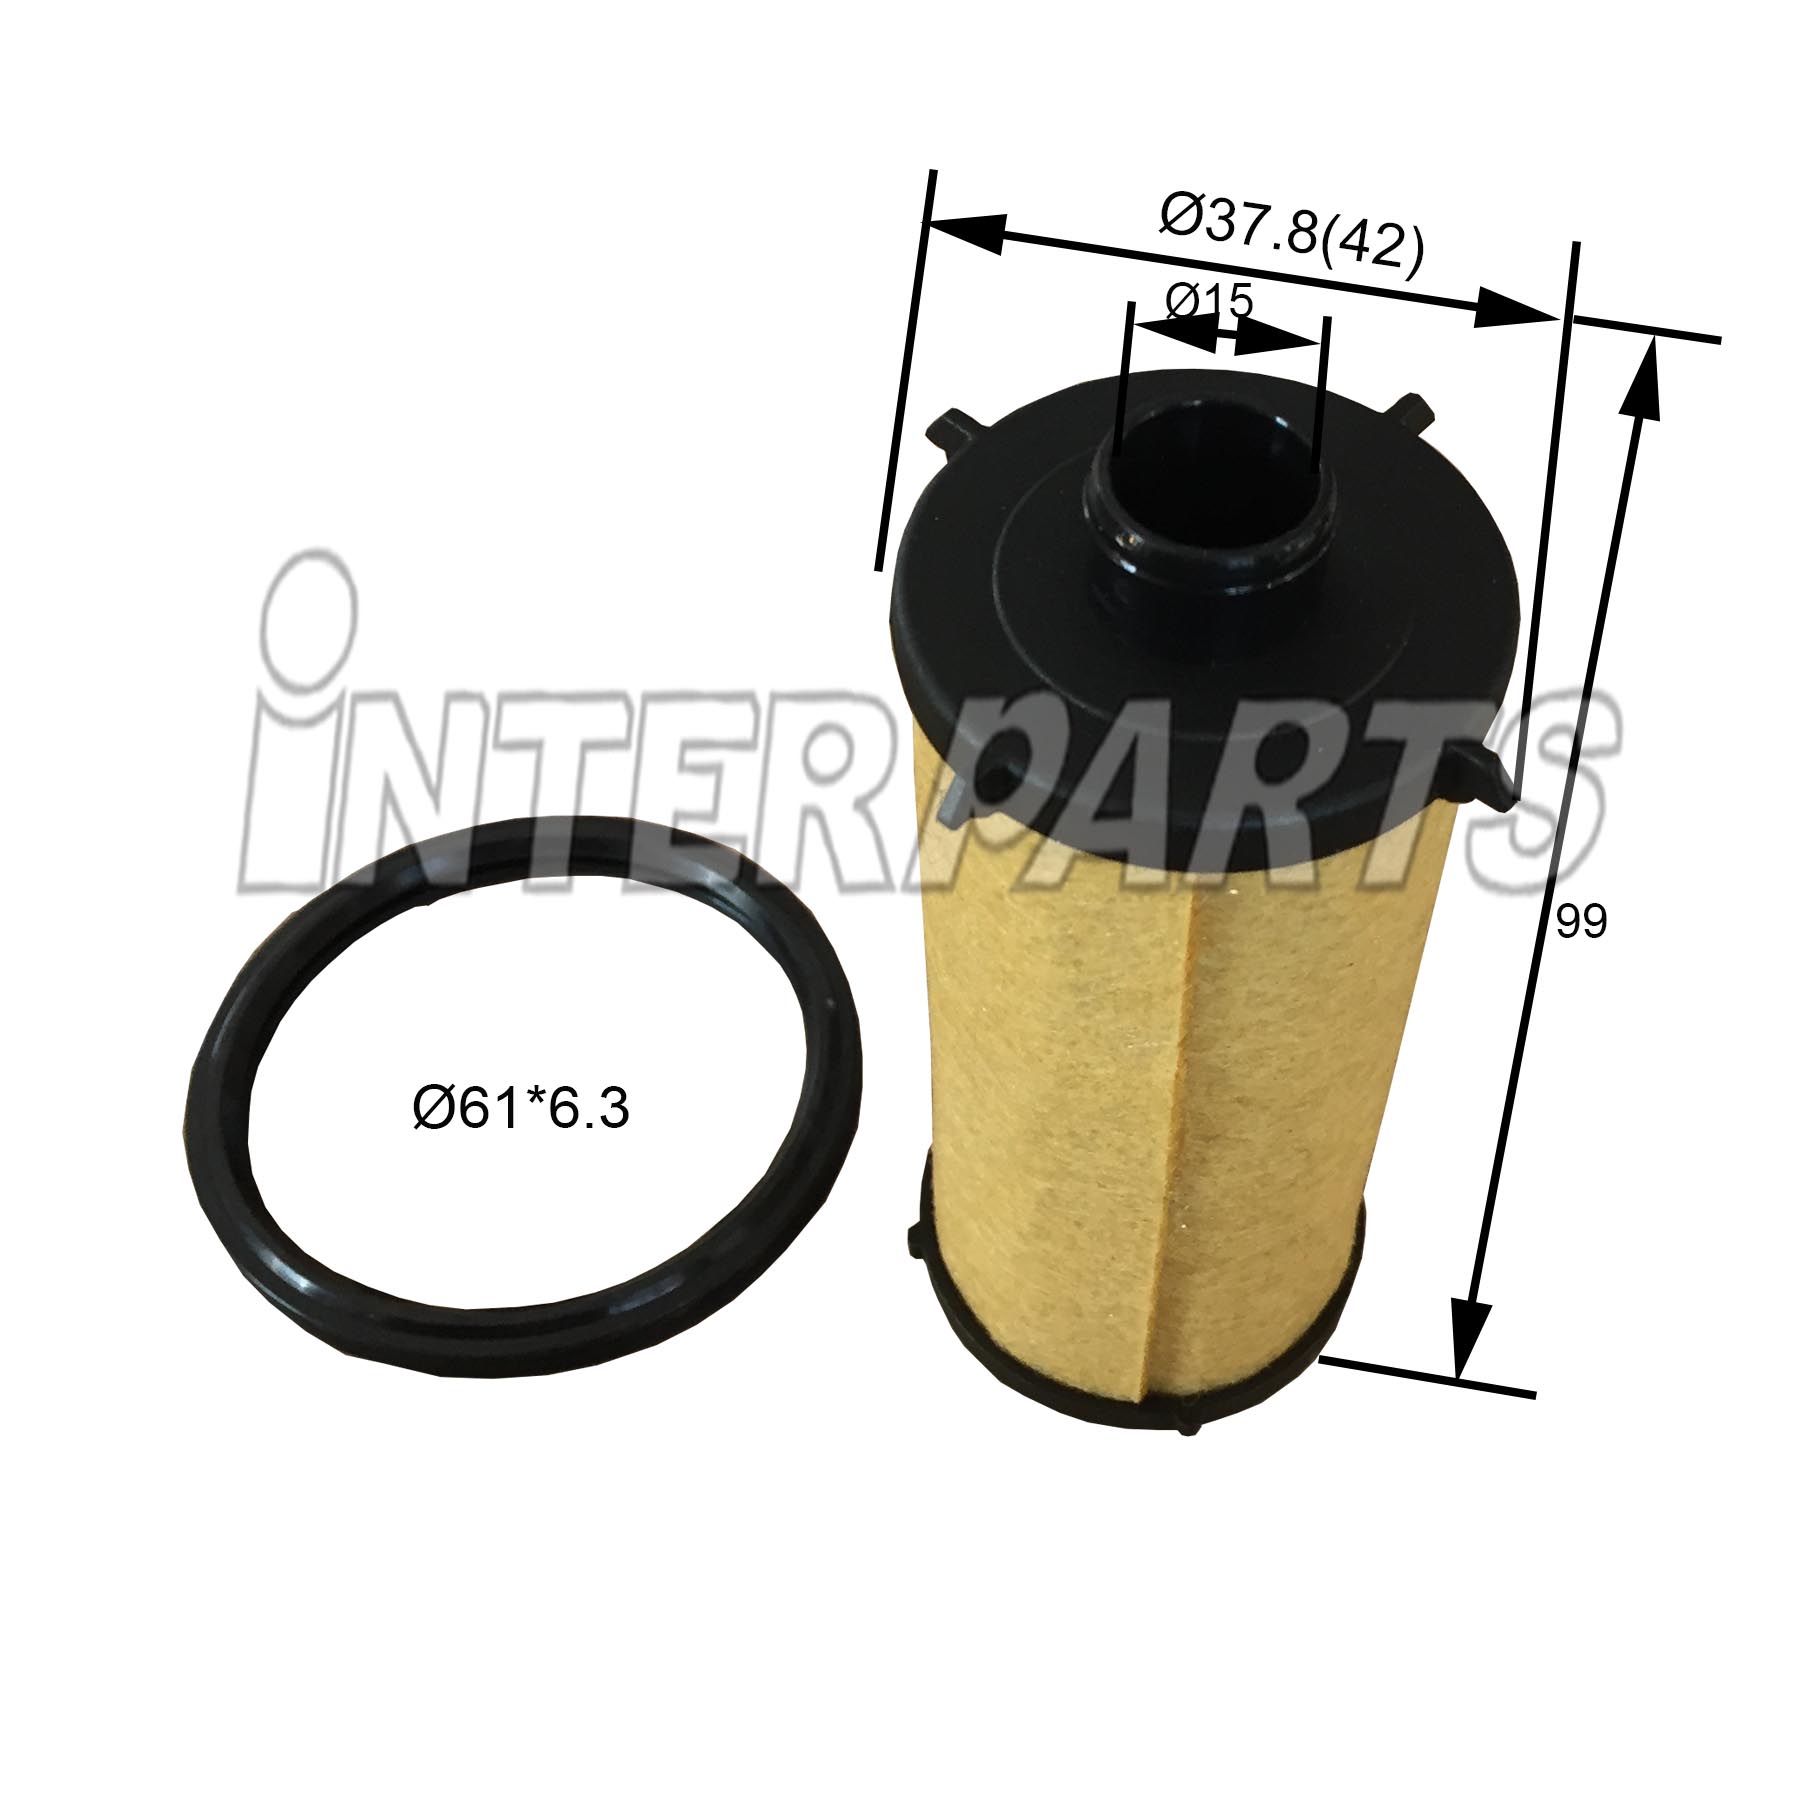 MERCEDES BENZ 호환 TRANSMISSION FILTER A0229978045 IPTS-E168AS